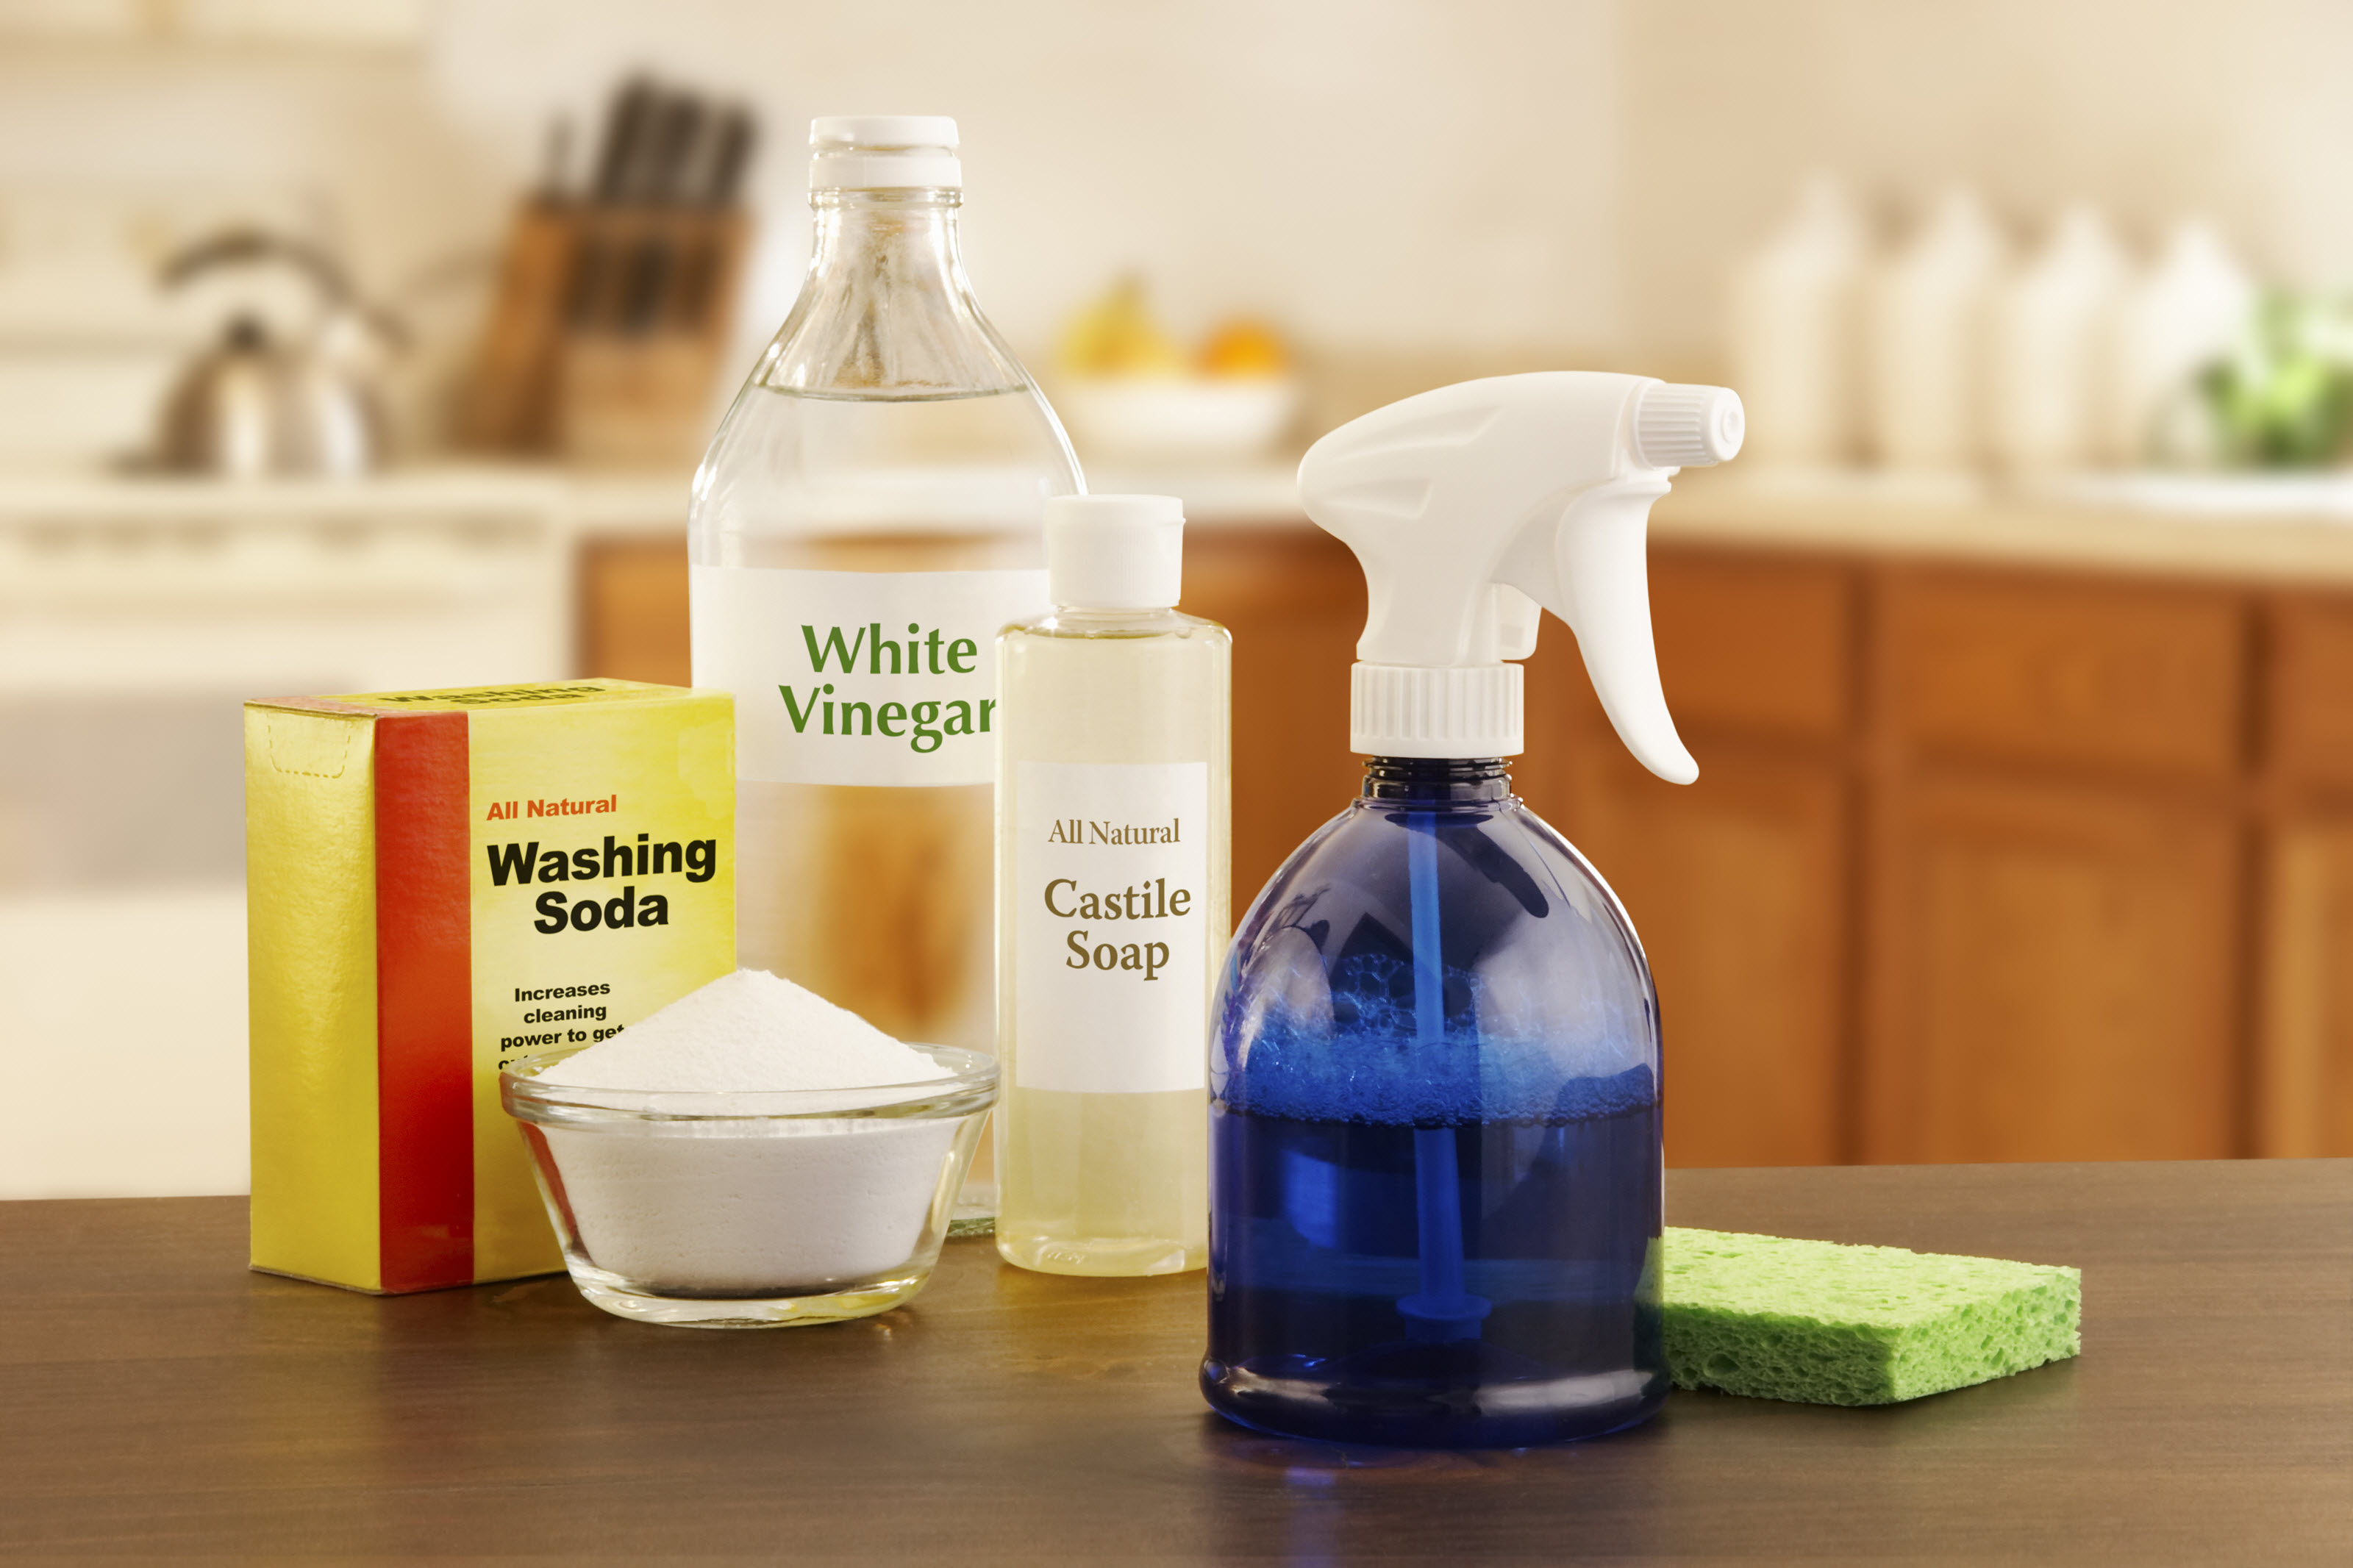 How do I know which cleaning products are the most environmentally